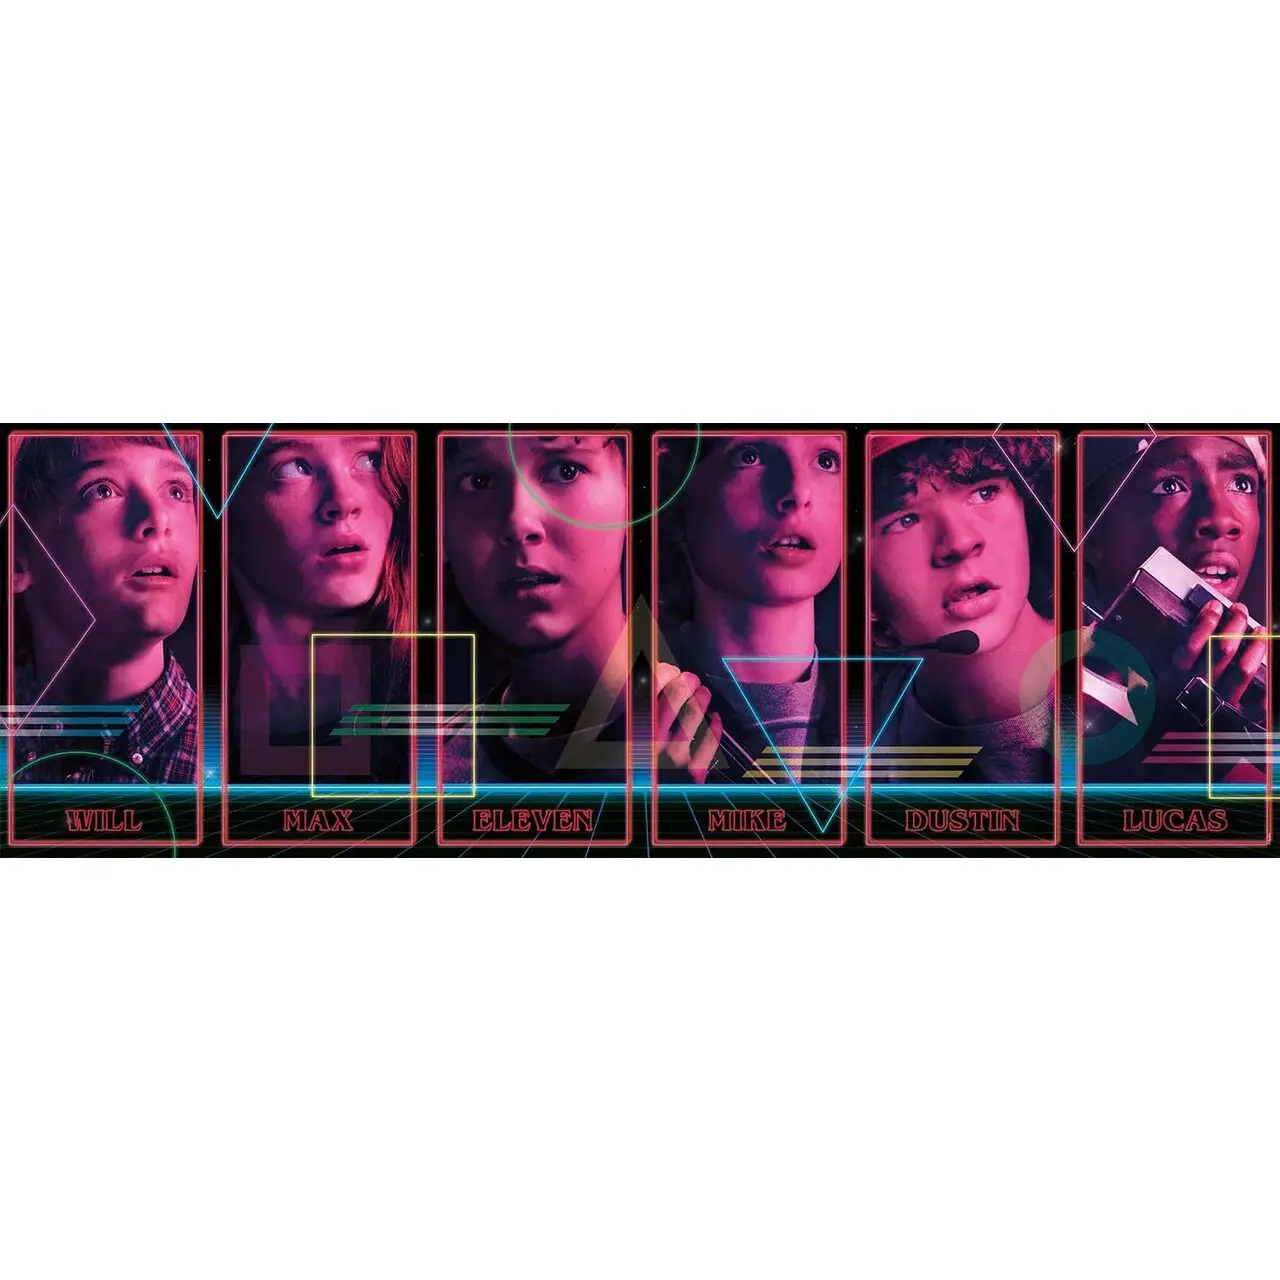 Puzzle Stranger Things 1000 Teile